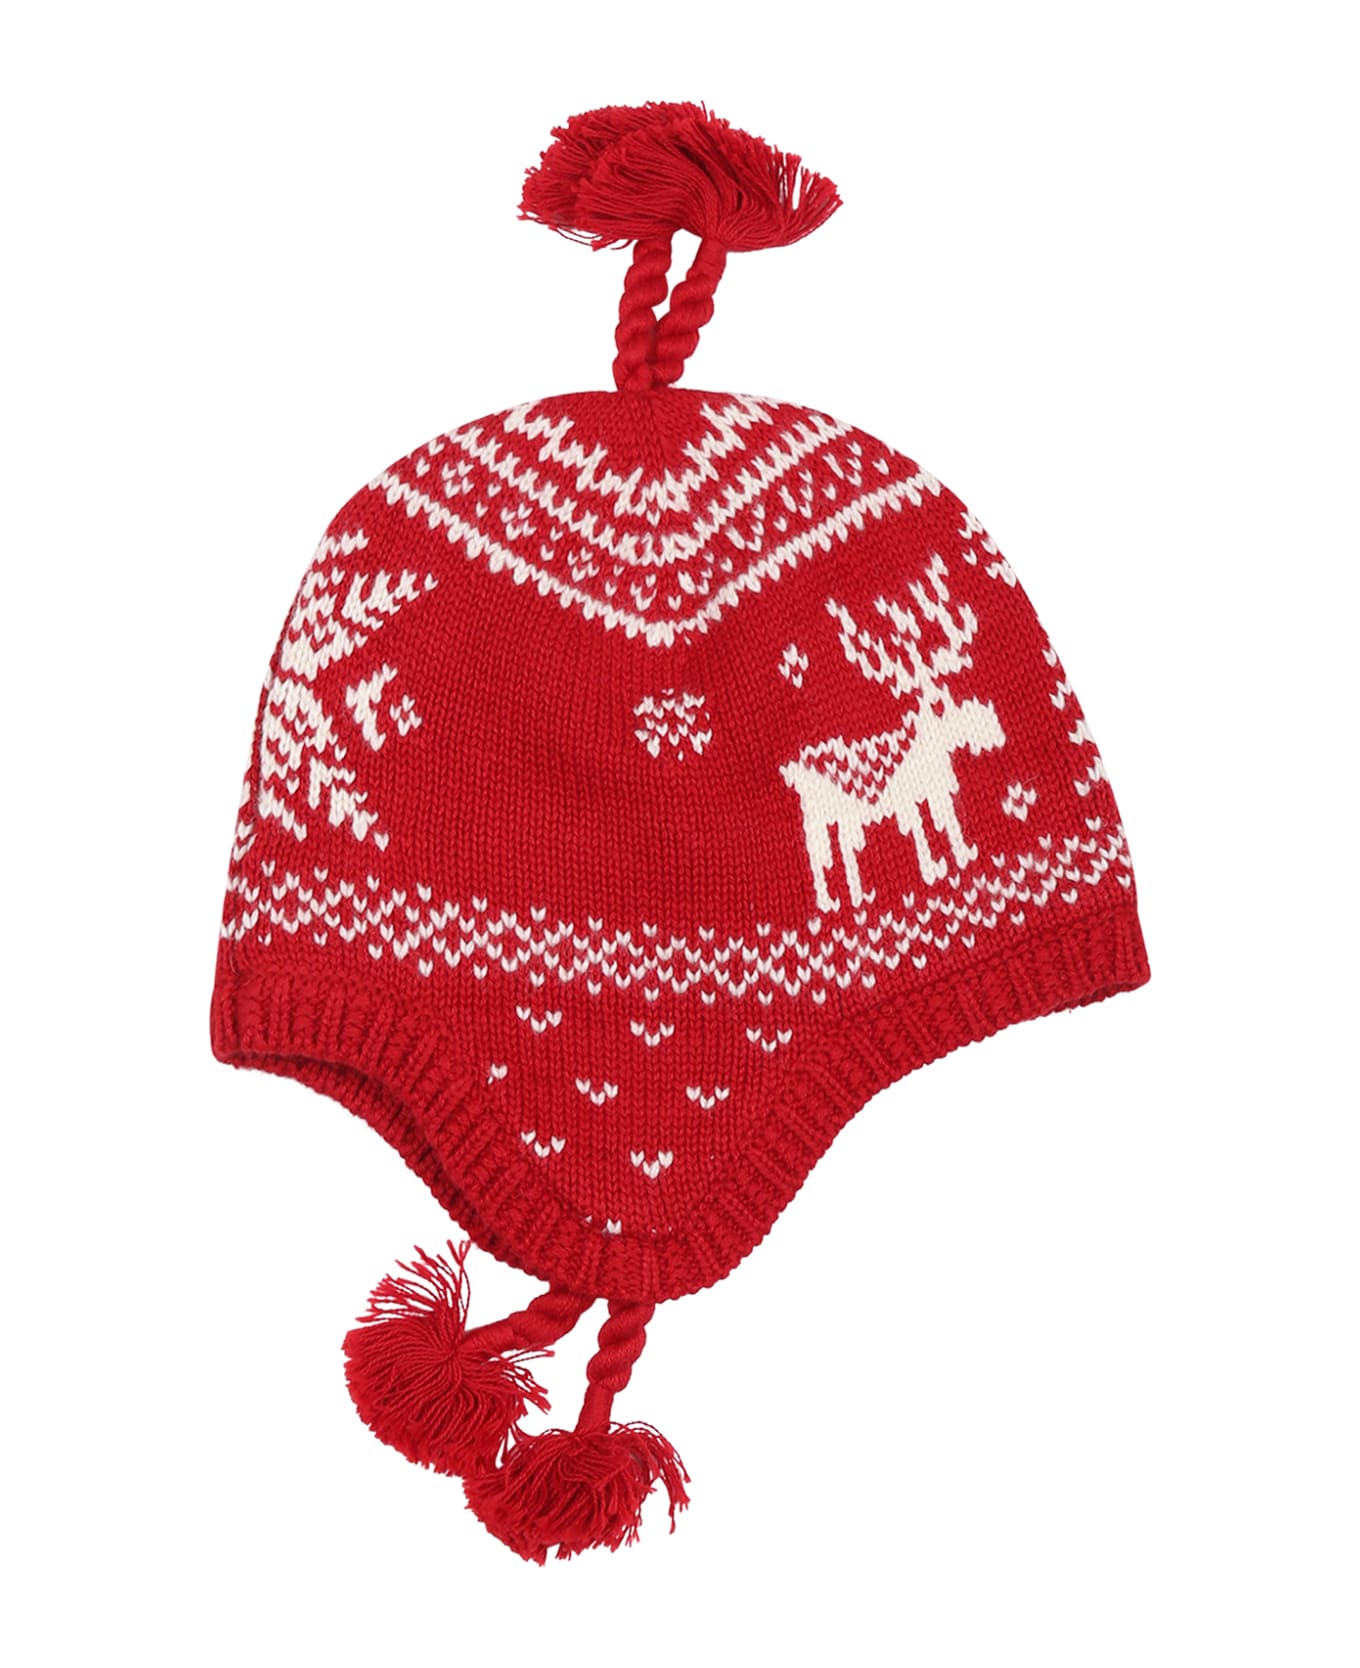 Ralph Lauren Red Hat For Baby Girl With Jacquard Pattern - Red アクセサリー＆ギフト